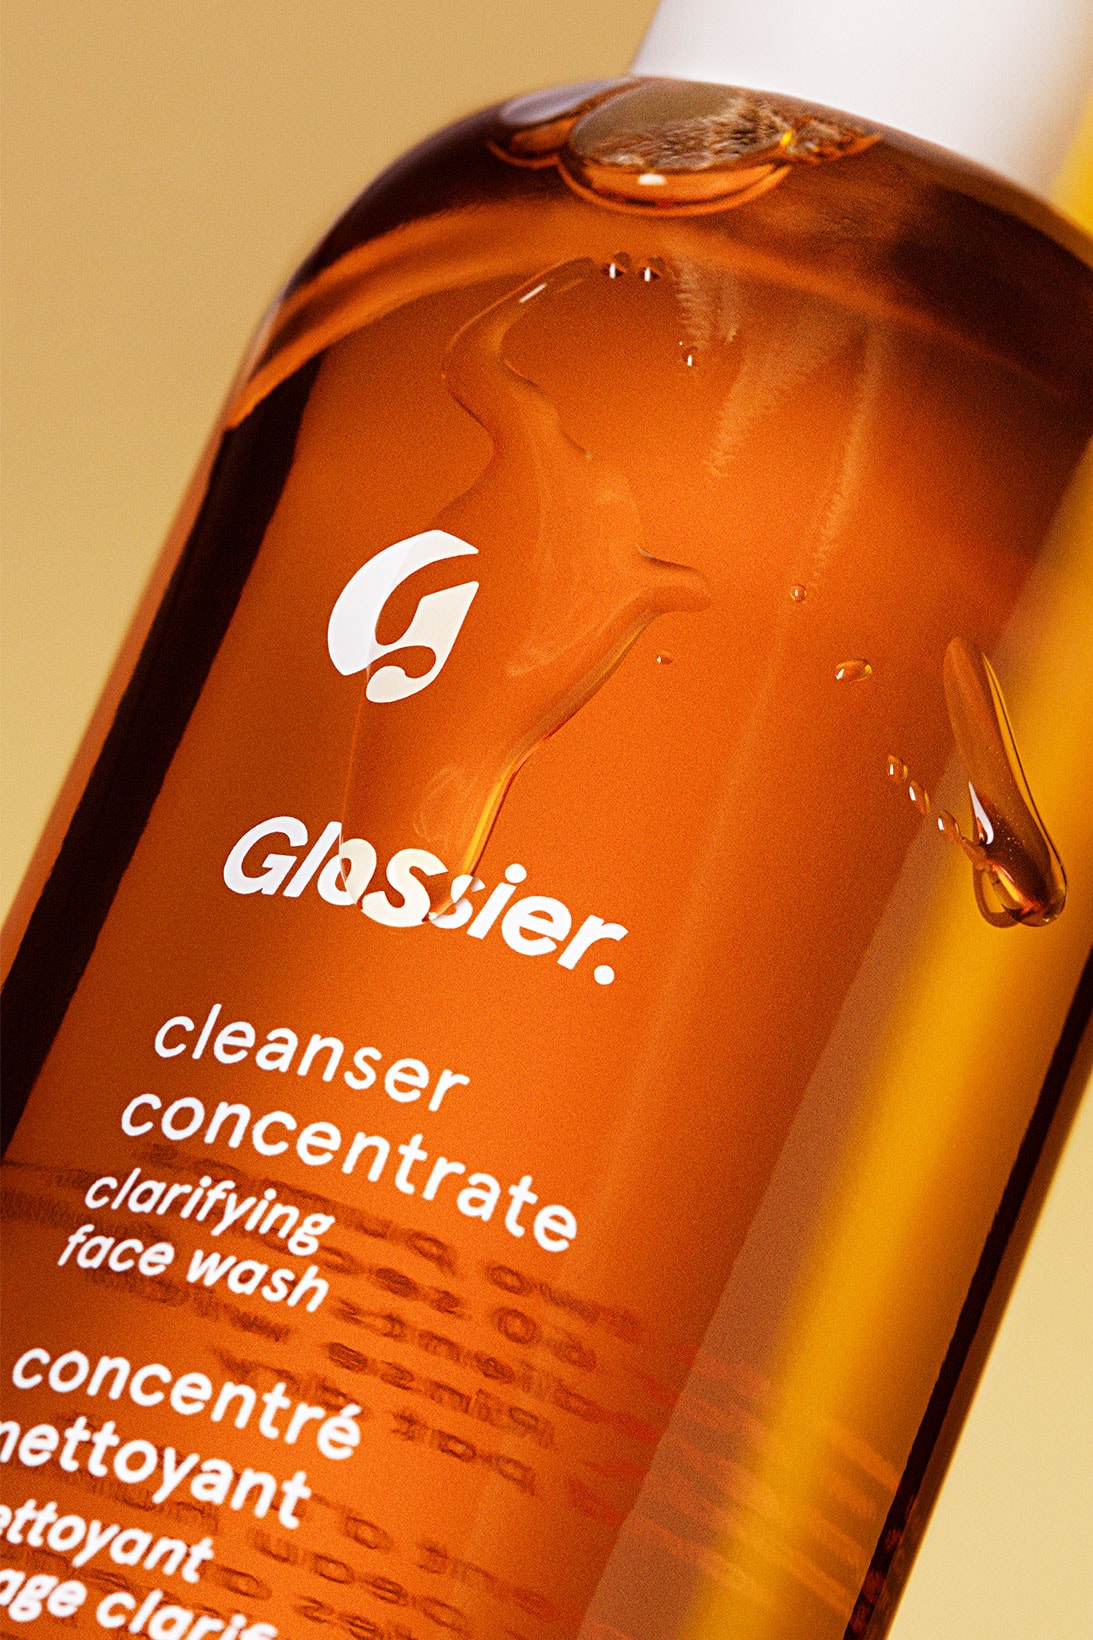 glossier cleanser concentrate face wash bottle packaging label logo